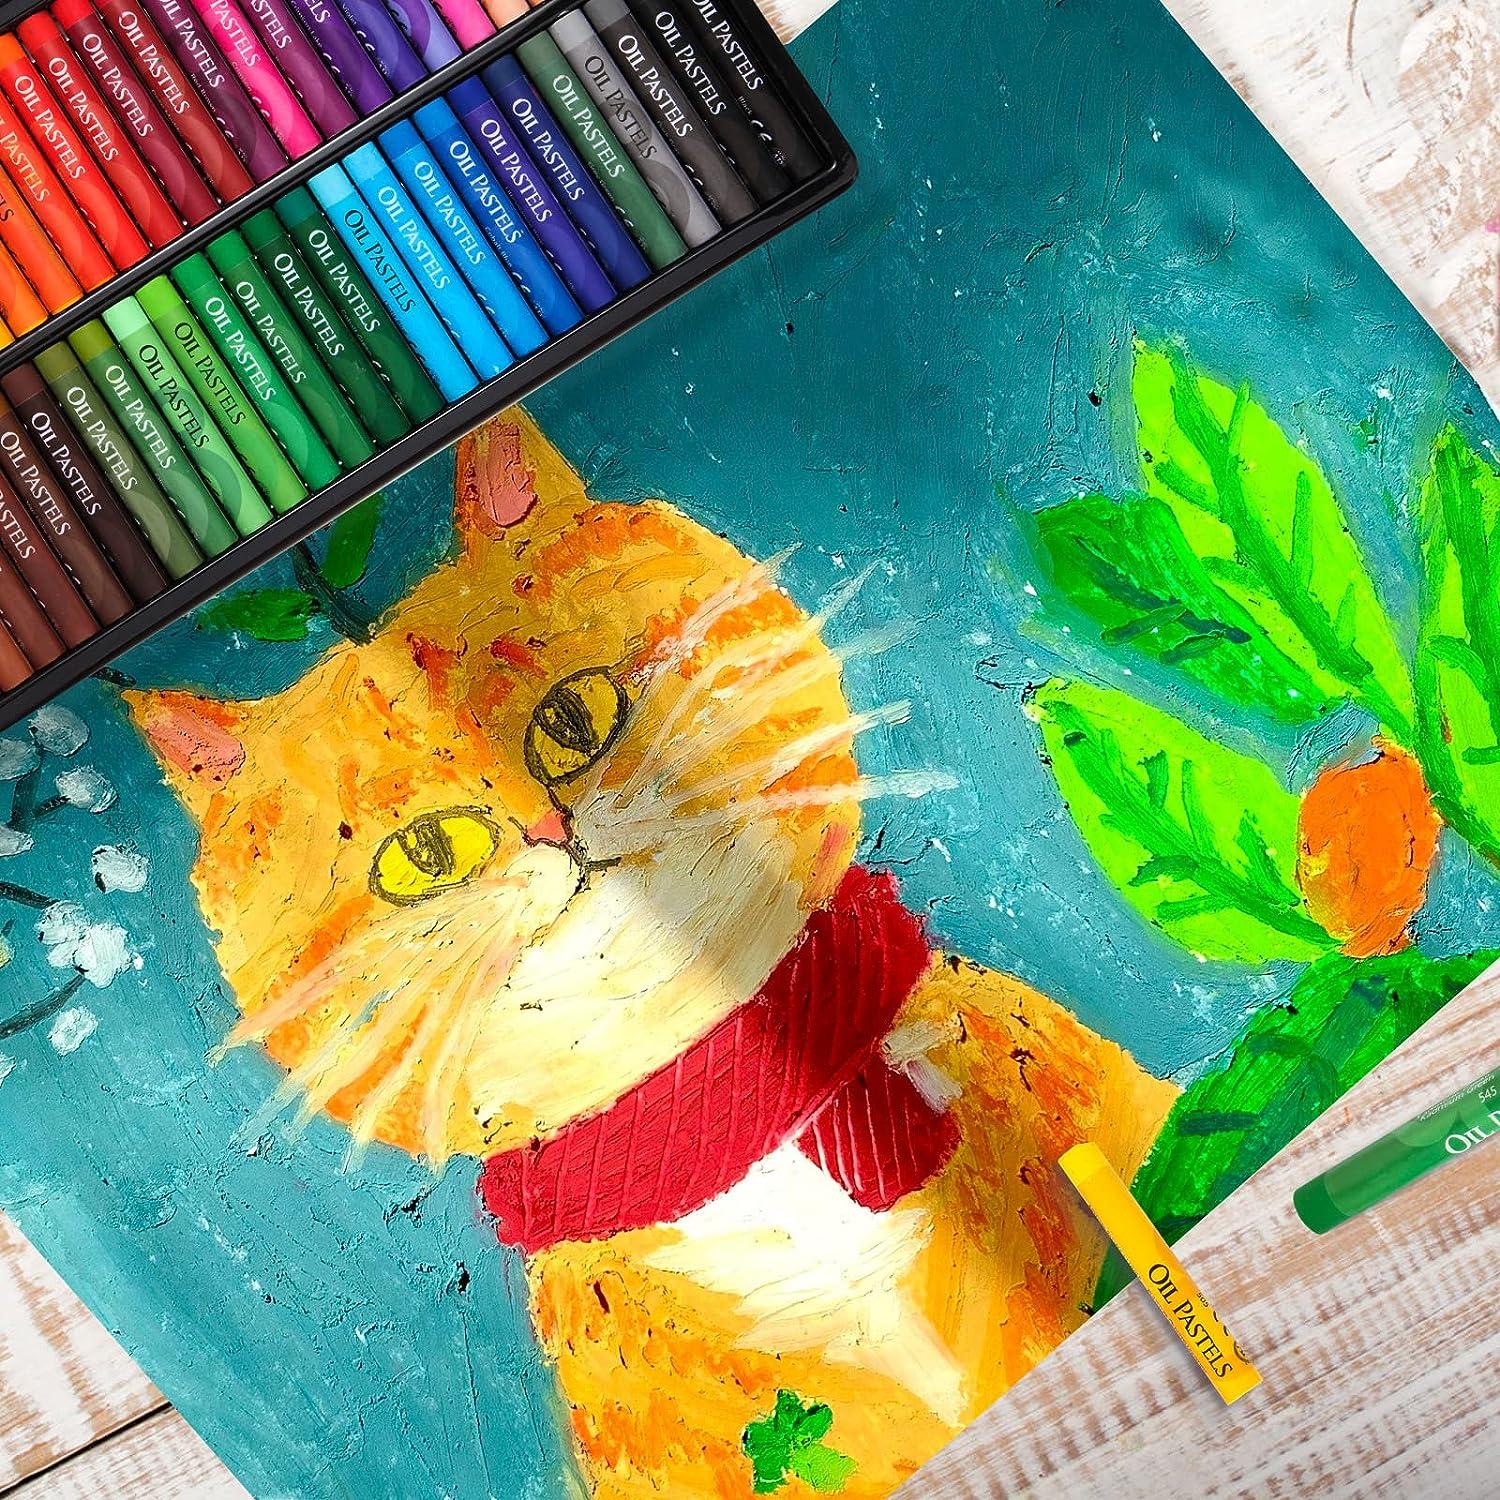 YQSWXZQP Oil Pastels-Crayons-Oil Sticks-Oil Pastels for Kids-Oil Paint sticks-Vibrant Oil Pastels Set for Artists-Perfect for Drawing Painting and